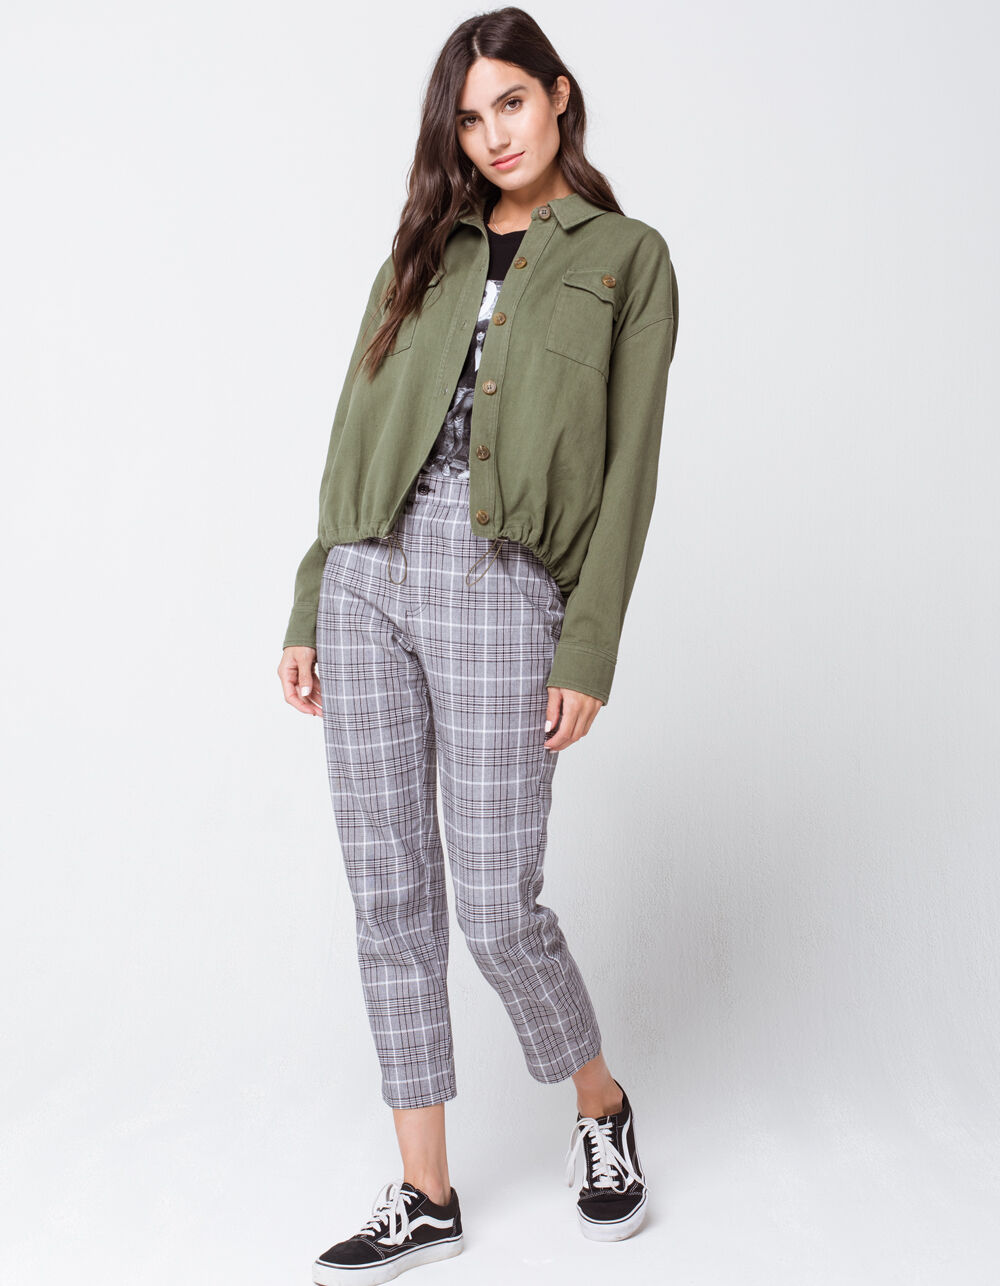 SKY AND SPARROW Cinched Twill Womens Jacket - OLIVE | Tillys